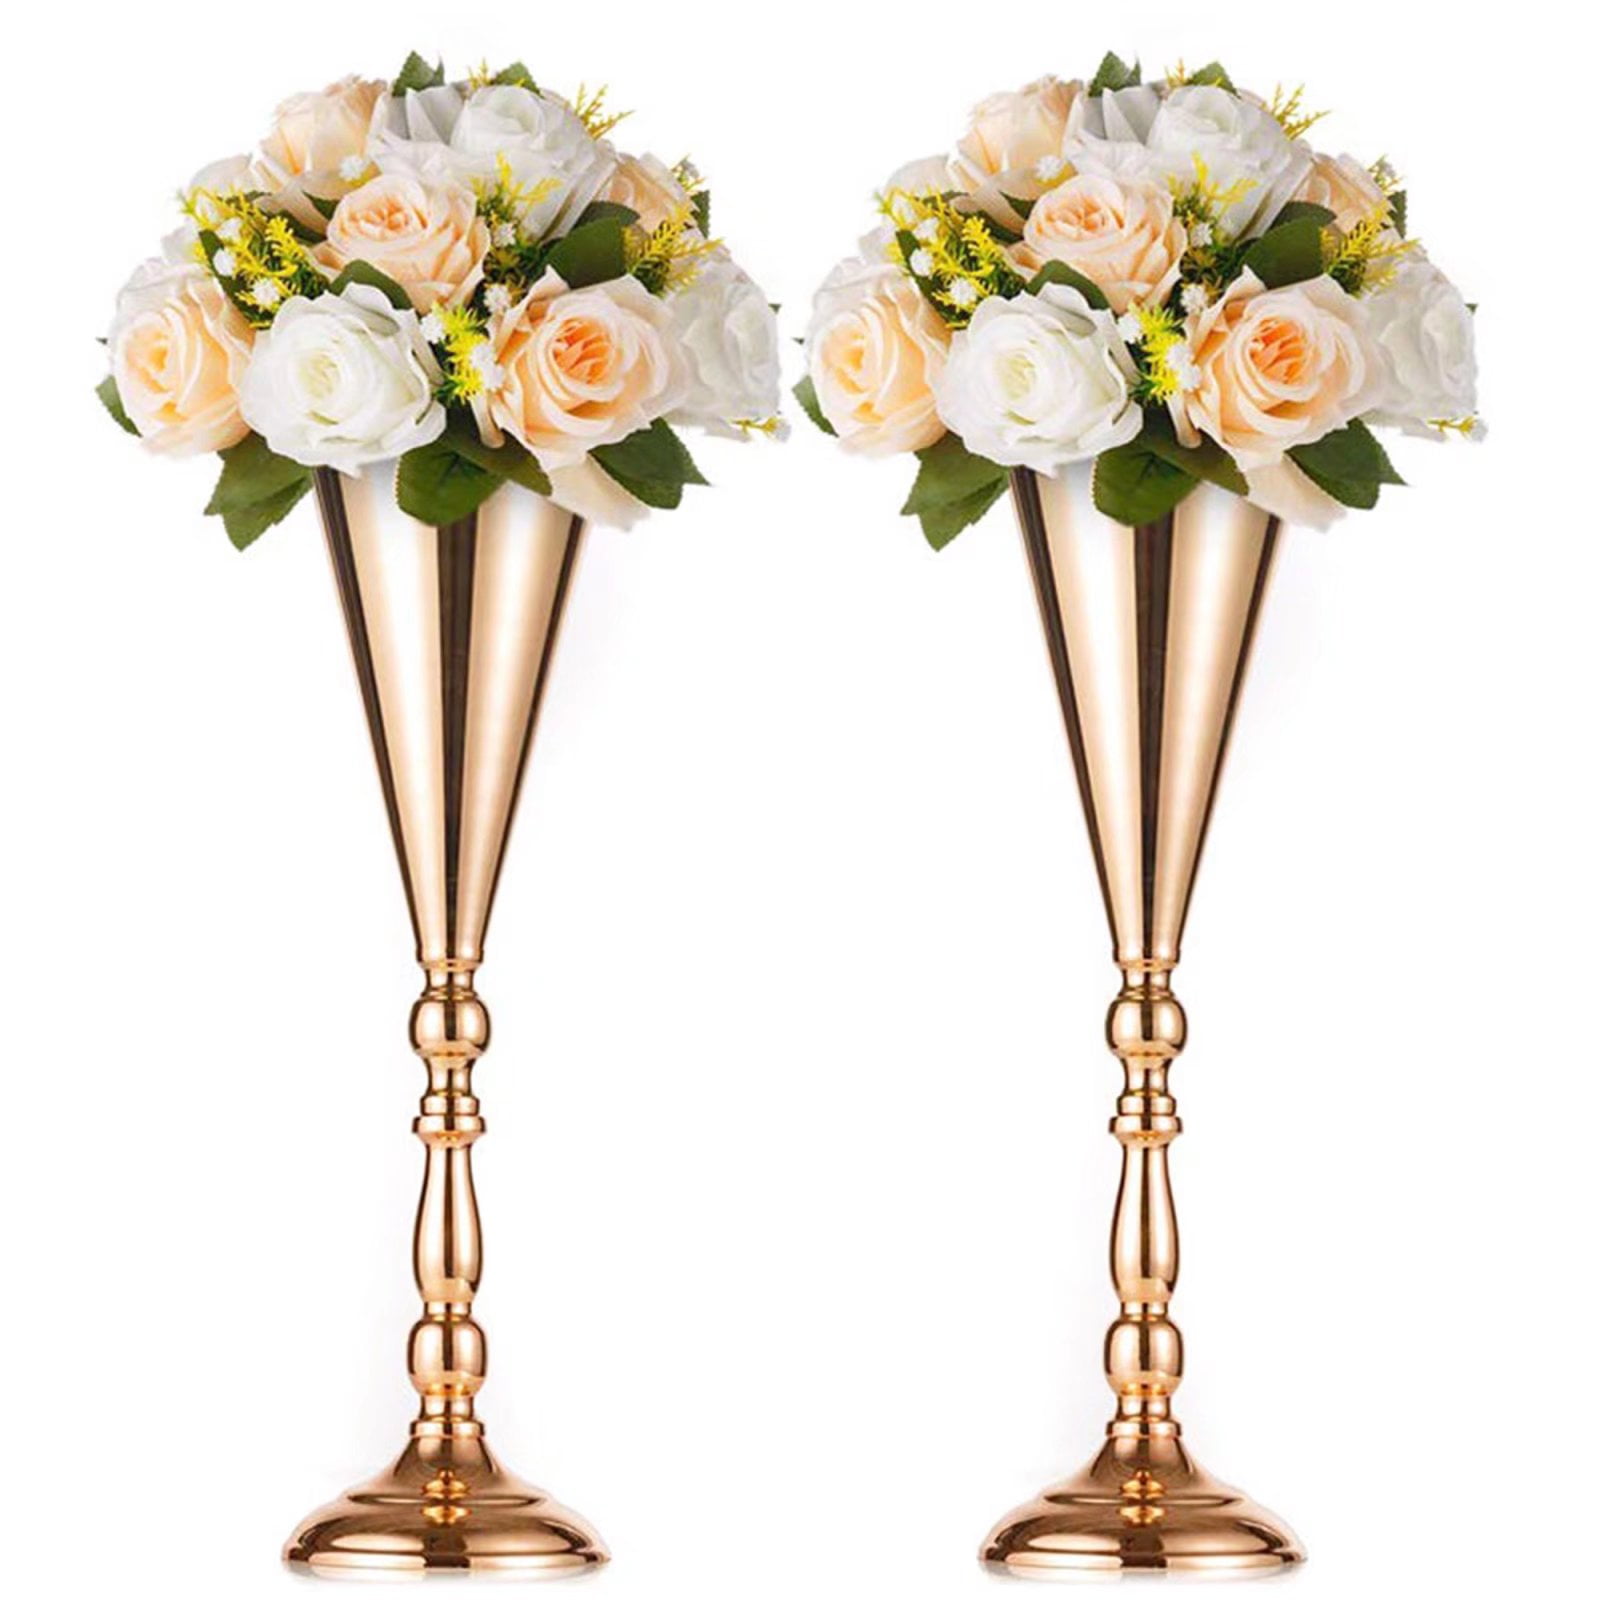 Gold Metal Trumpet Vases Tall Wedding Centerpiece Vses  22 inches 